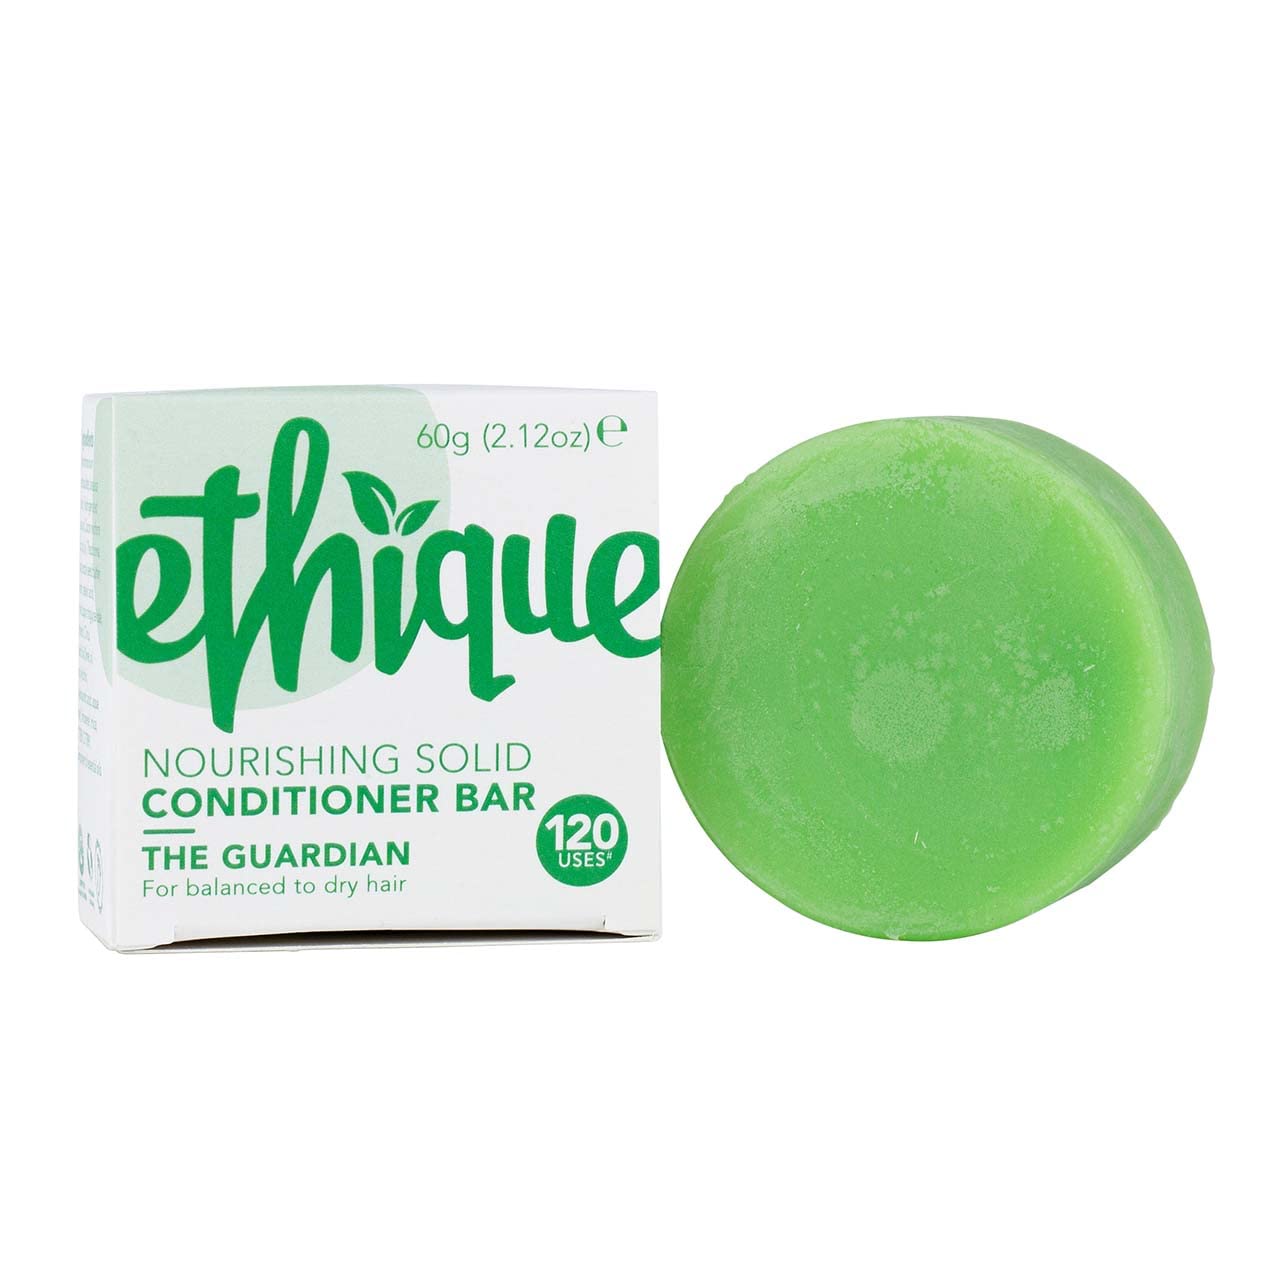 Ethique The Guardian - Nourishing Solid Conditioner Bar for Balanced to Dry & Damaged Hair - Vegan, Eco-Friendly, Plastic-Free, Cruelty-Free,2.12 oz (Pack of 1)